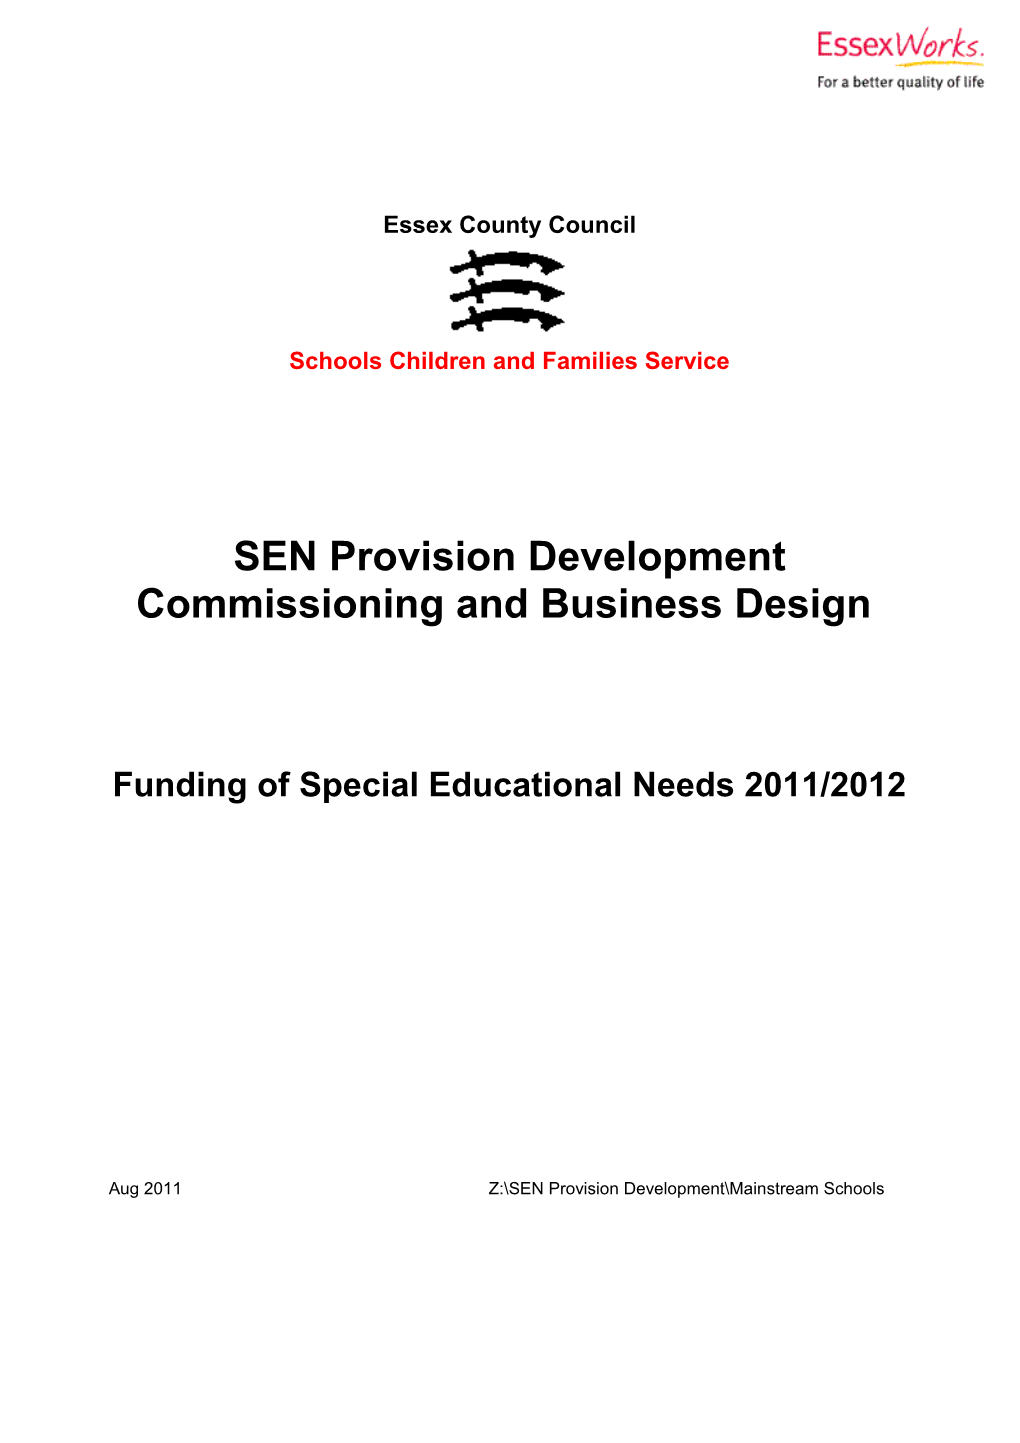 Funding of Special Educational Needs